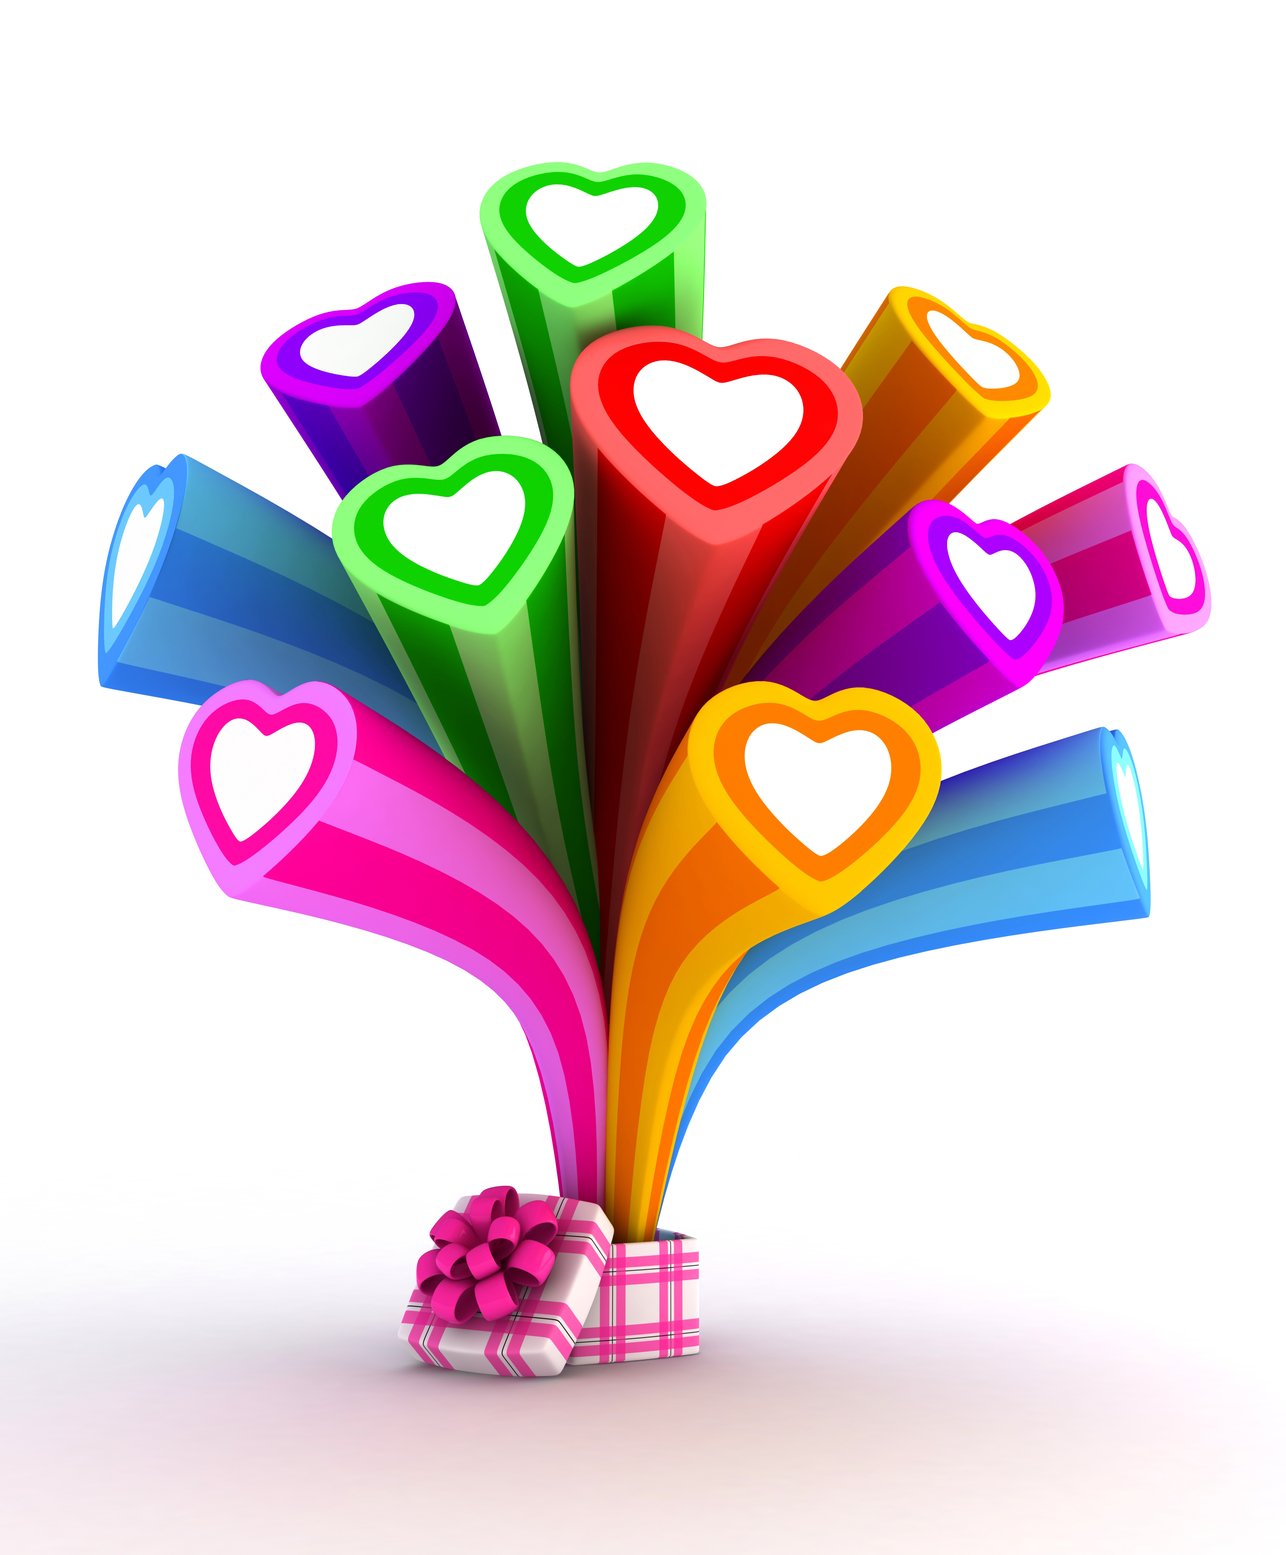 Illustration of Colorful Hearts Bursting from a Giftbox